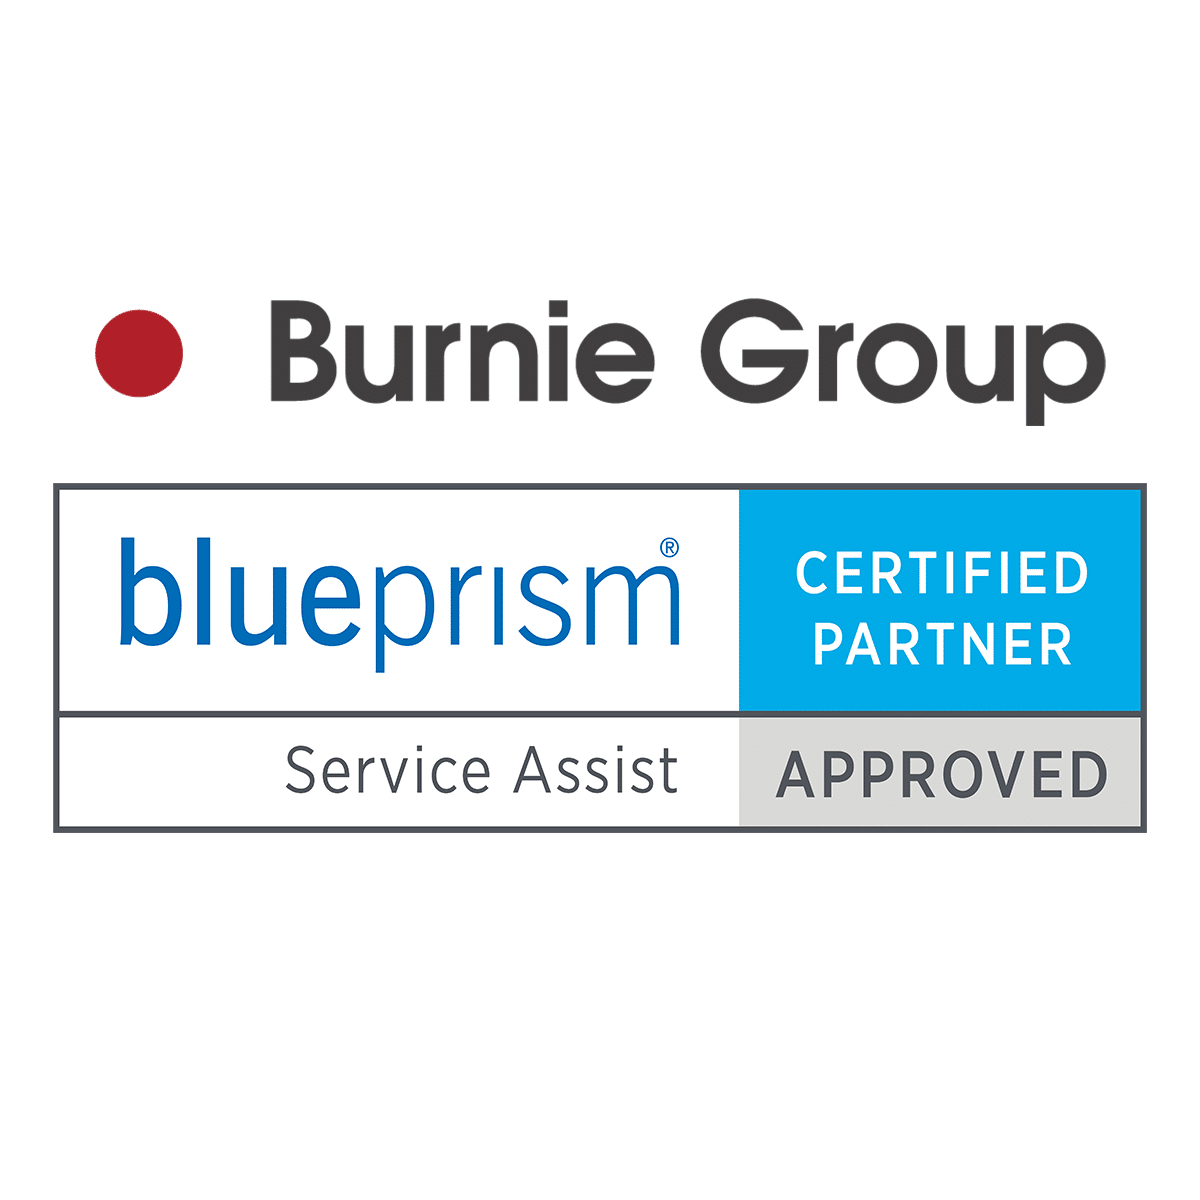 PRESS RELEASE: Burnie Group First to Implement Blue Prism Service Assist in North America